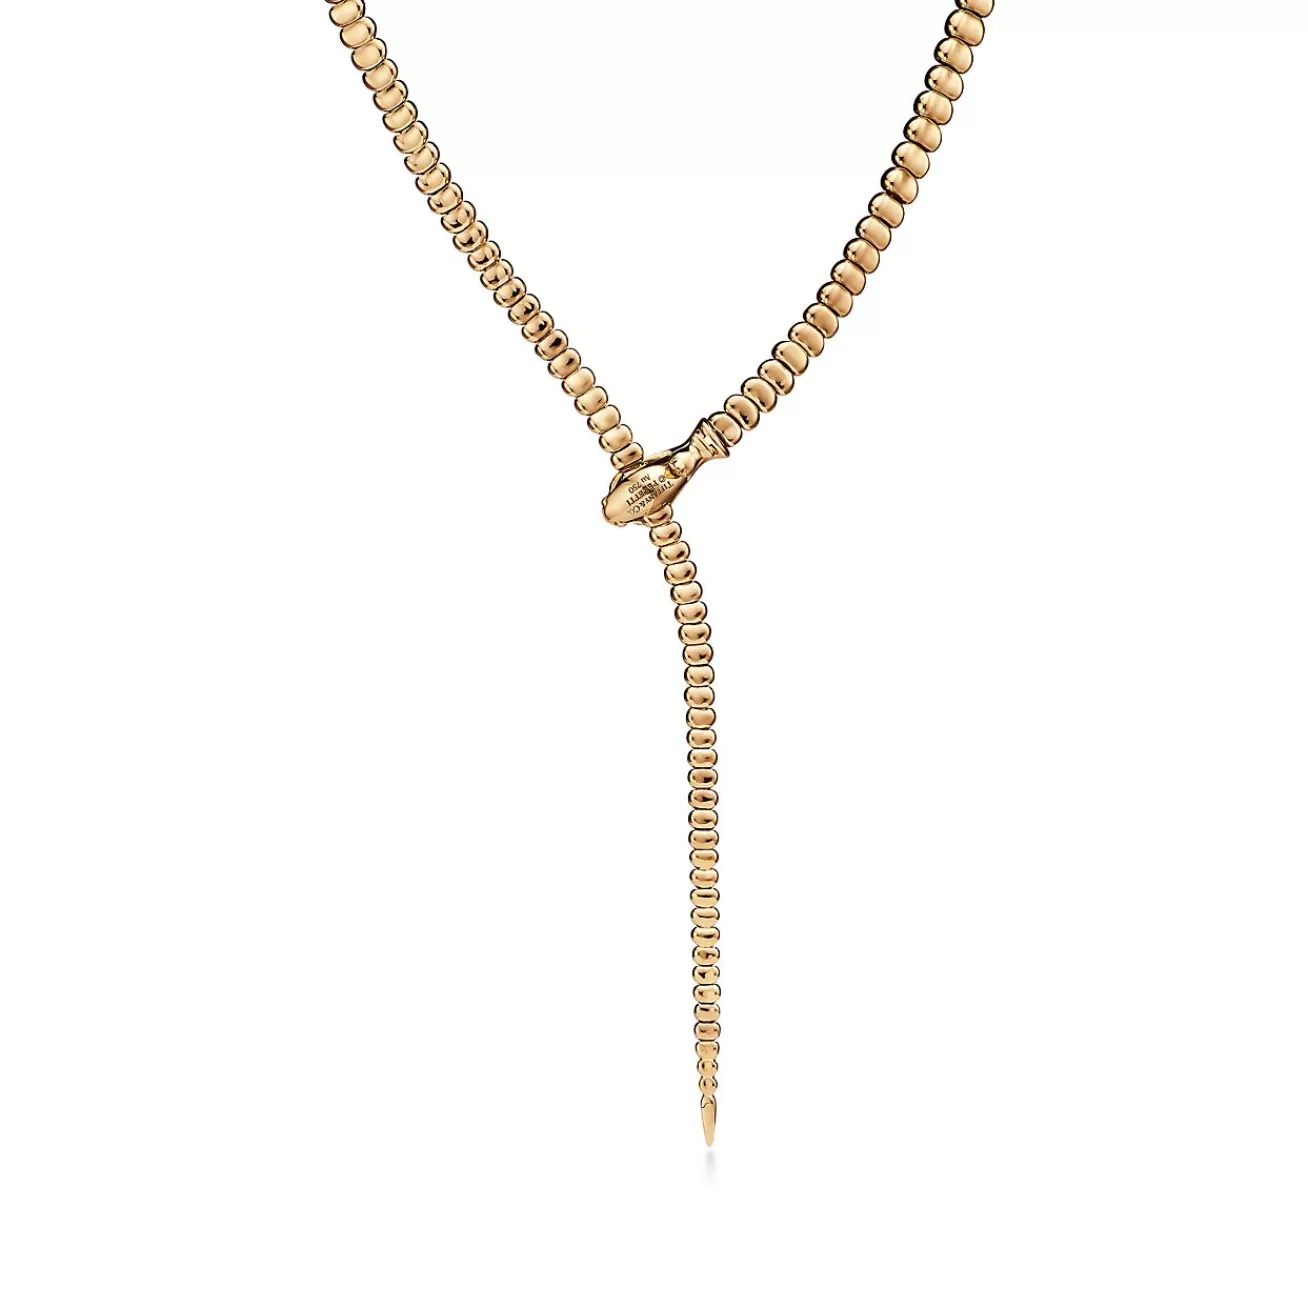 Tiffany & Co. Elsa Peretti® Snake Necklace in Yellow Gold | ^ Necklaces & Pendants | Gold Jewelry